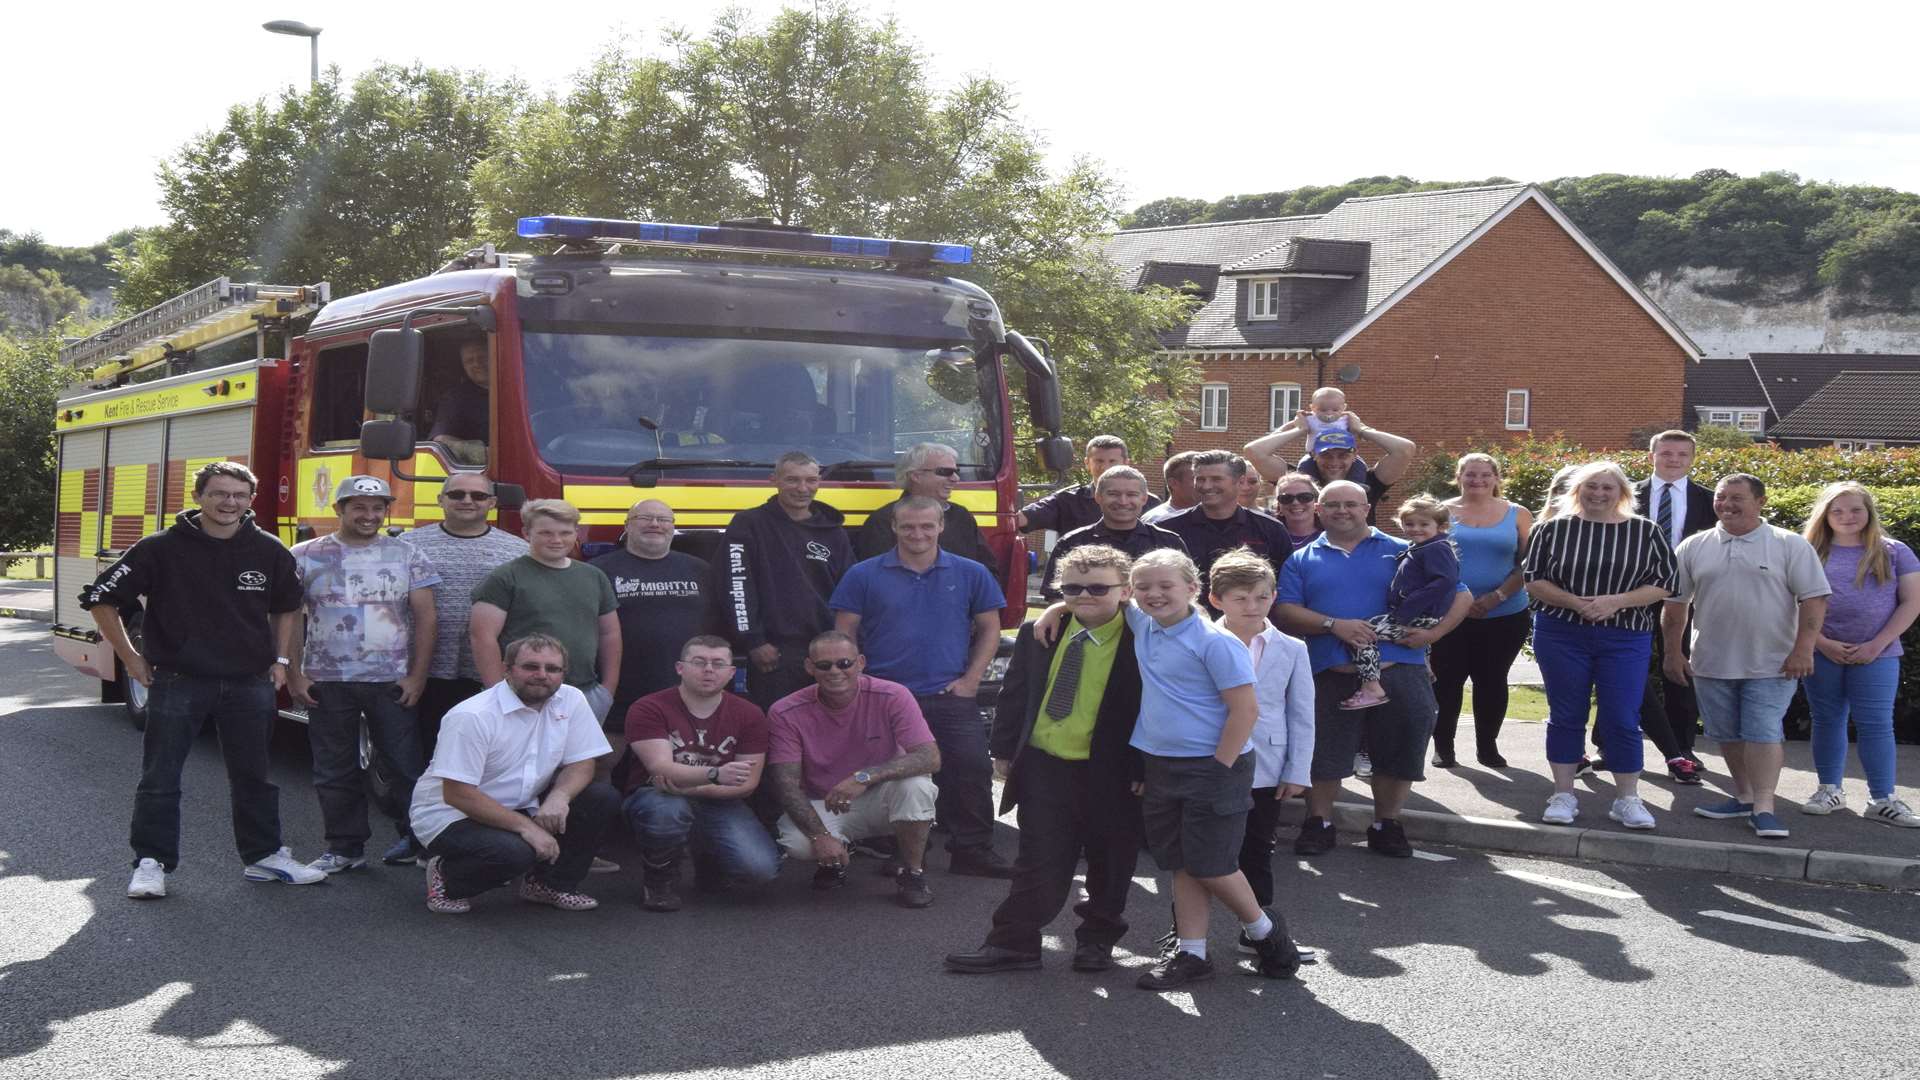 A crew from Strood fire station were also part of the special escort